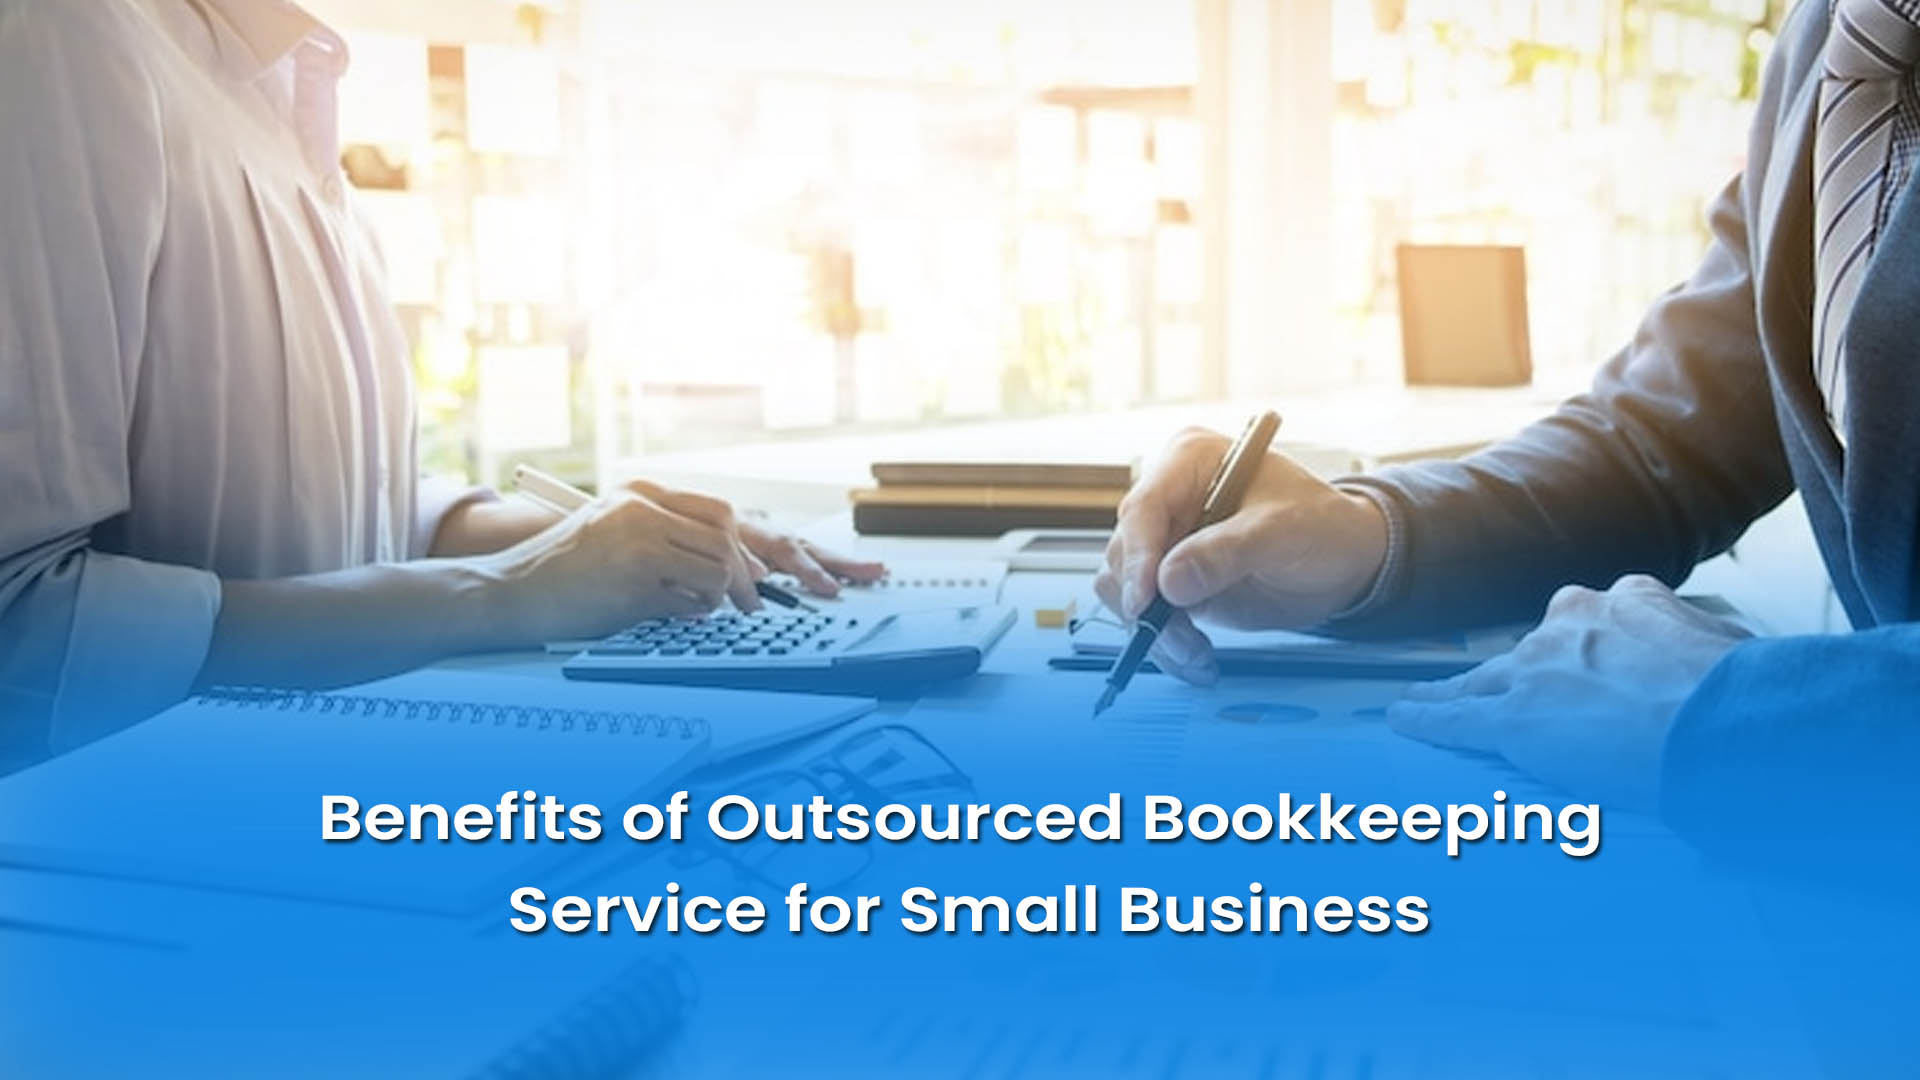 Benefits of Outsourced Bookkeeping Service for Small Business